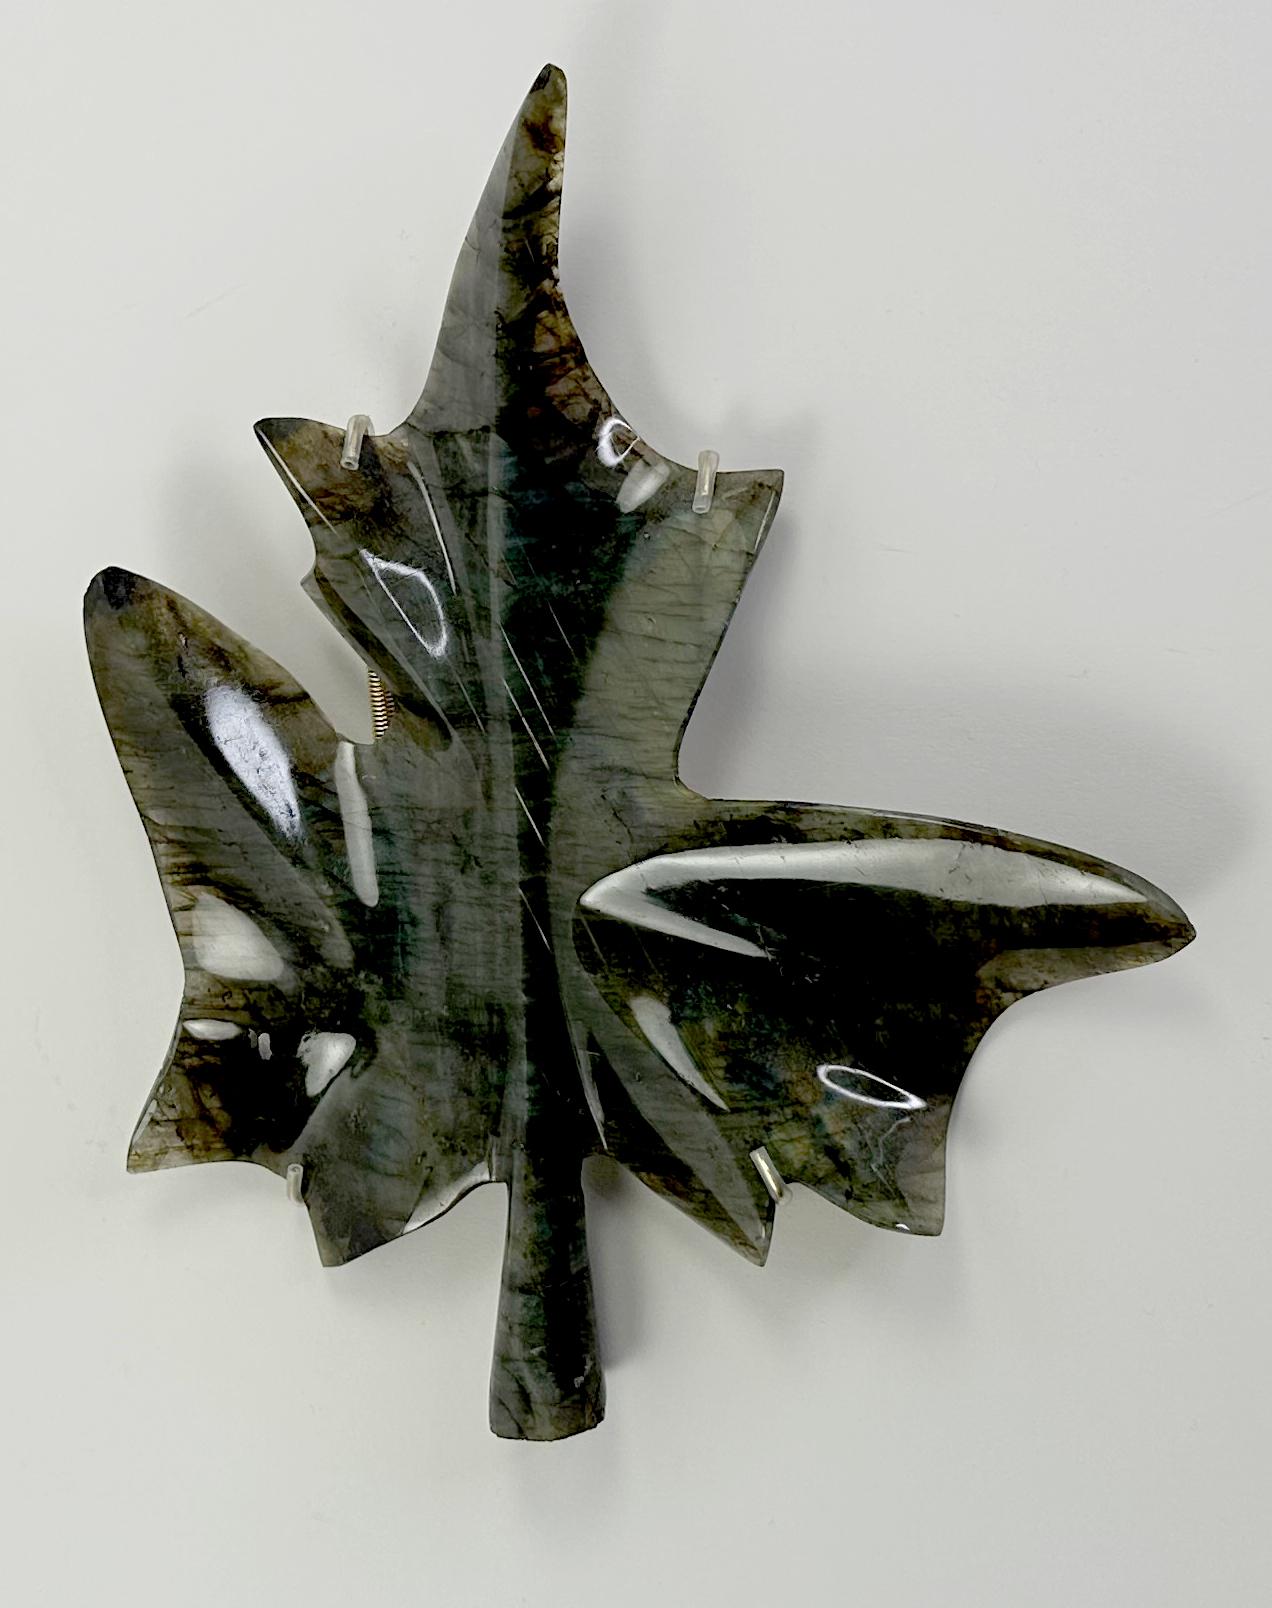 An intriguing custom carved and polished sculptural leaf. Made from labradorite, a mossy forest green color.

In good condition. Some gentle wear and aging consistent with age and use. One piece has a minor chip on the top of the leaf. 

No markings